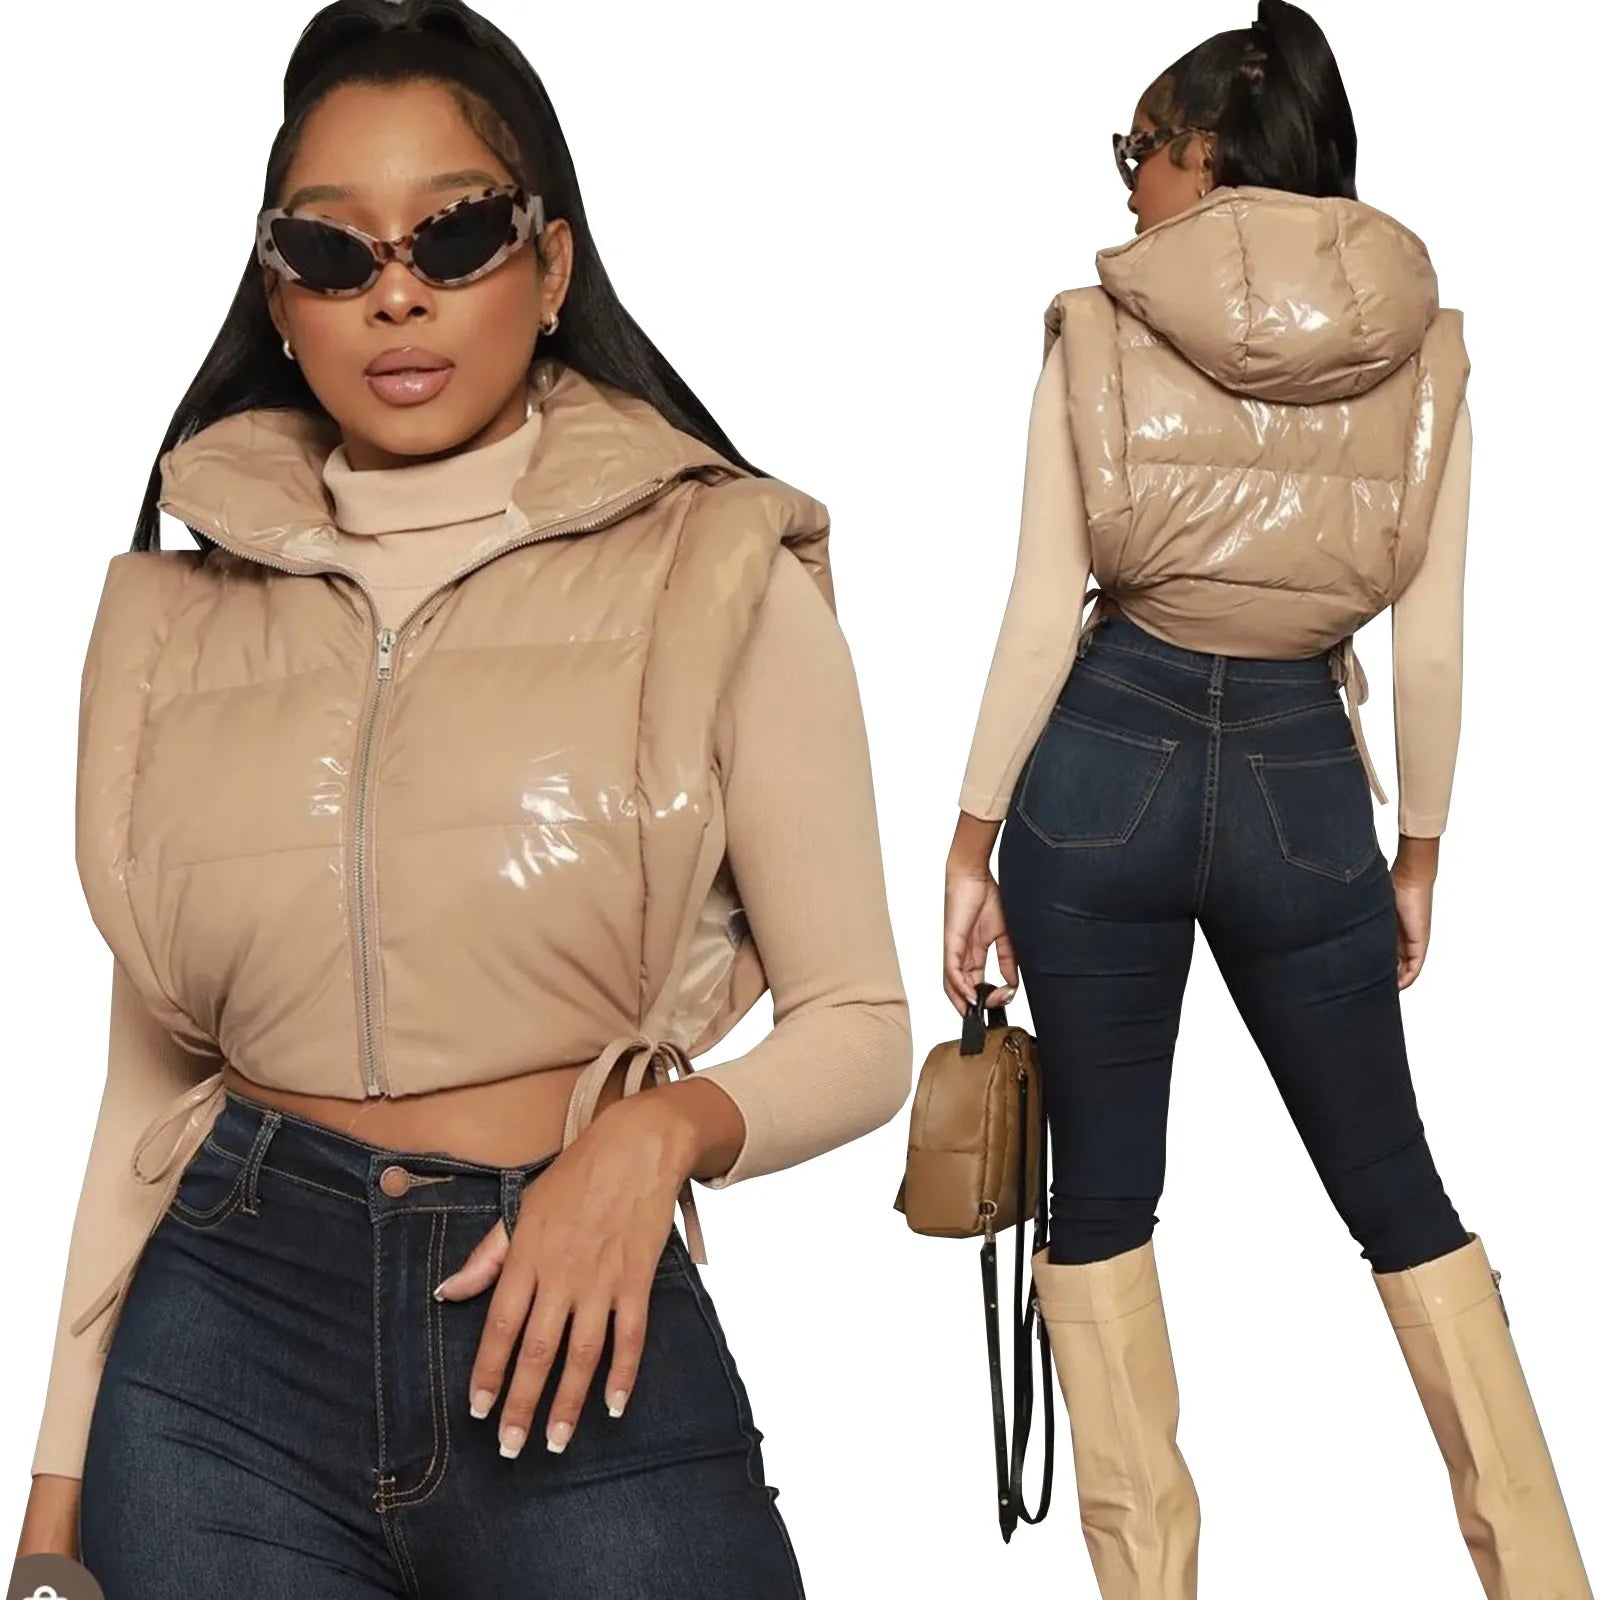 Sexy Side Slit Hooded Puff Jacket Vests Women Bandage Zipper Up Crop Tops Winter Autumn Casual Solid Clothes Streetwear